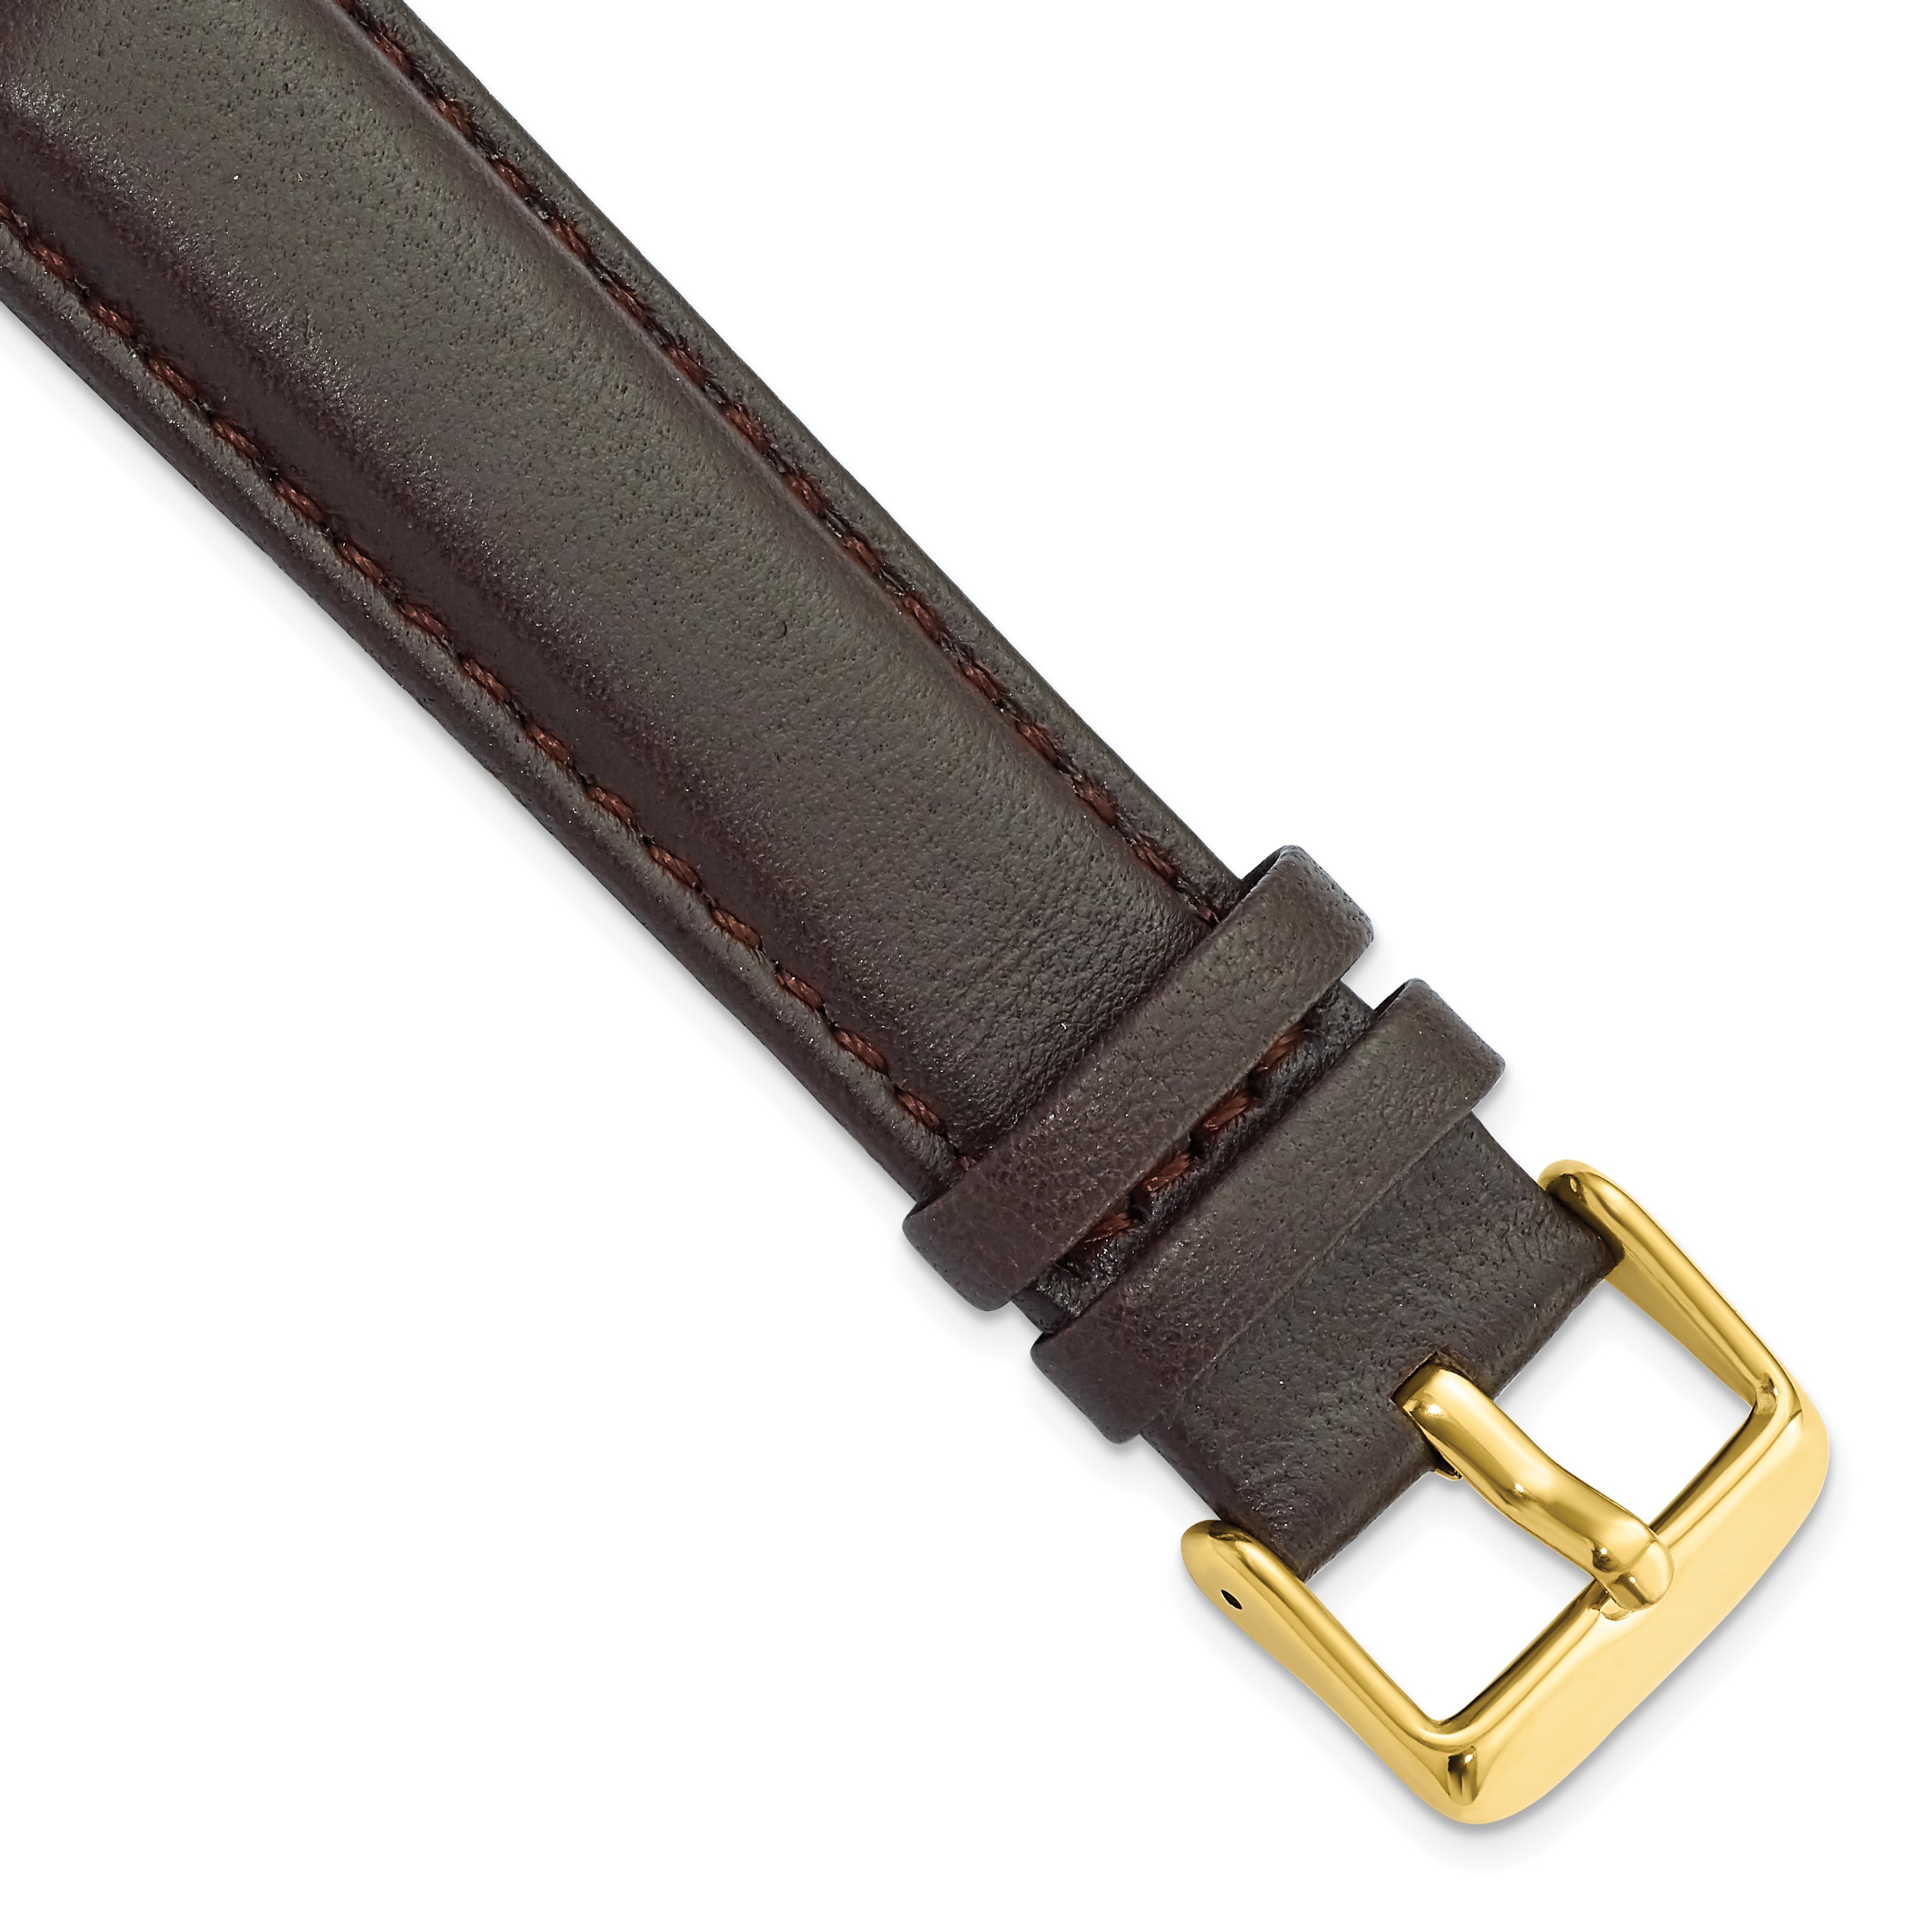 DeBeer 20mm Dark Brown Glove Leather with Gold-tone Panerai Style Buckle 7.75 inch Watch Band